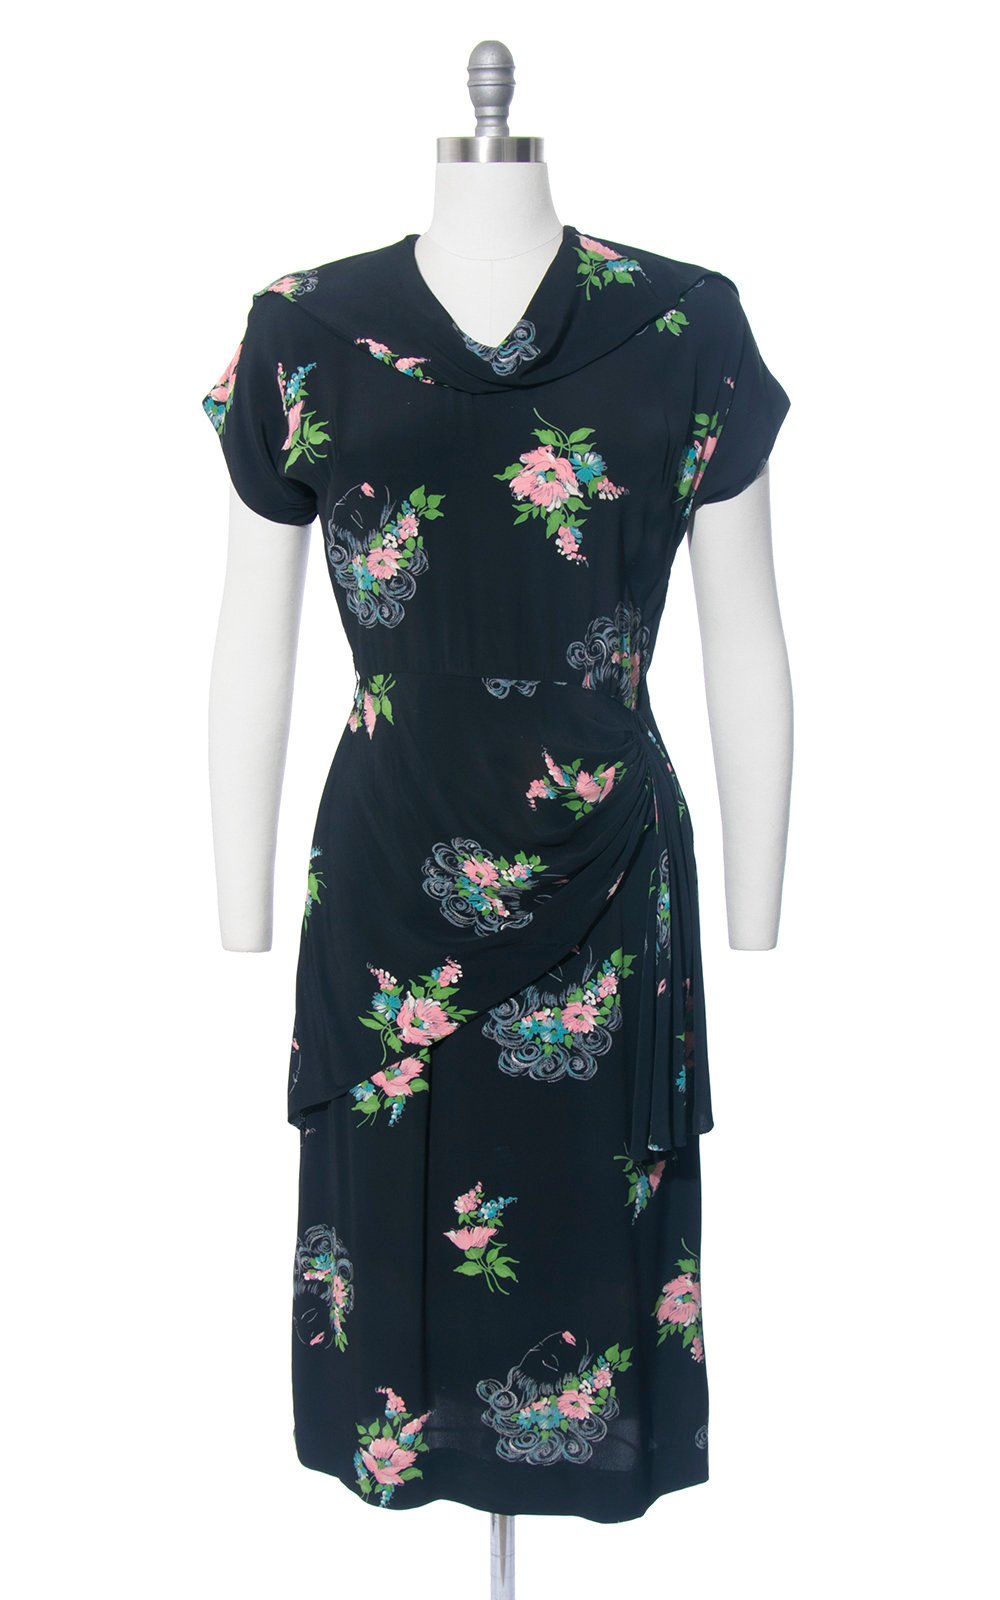 Vintage 1940s Dress | 40s Floral Novelty Print Rayon Lady Faces Printed Navy Blue Cocktail Evening Dress (small/medium)